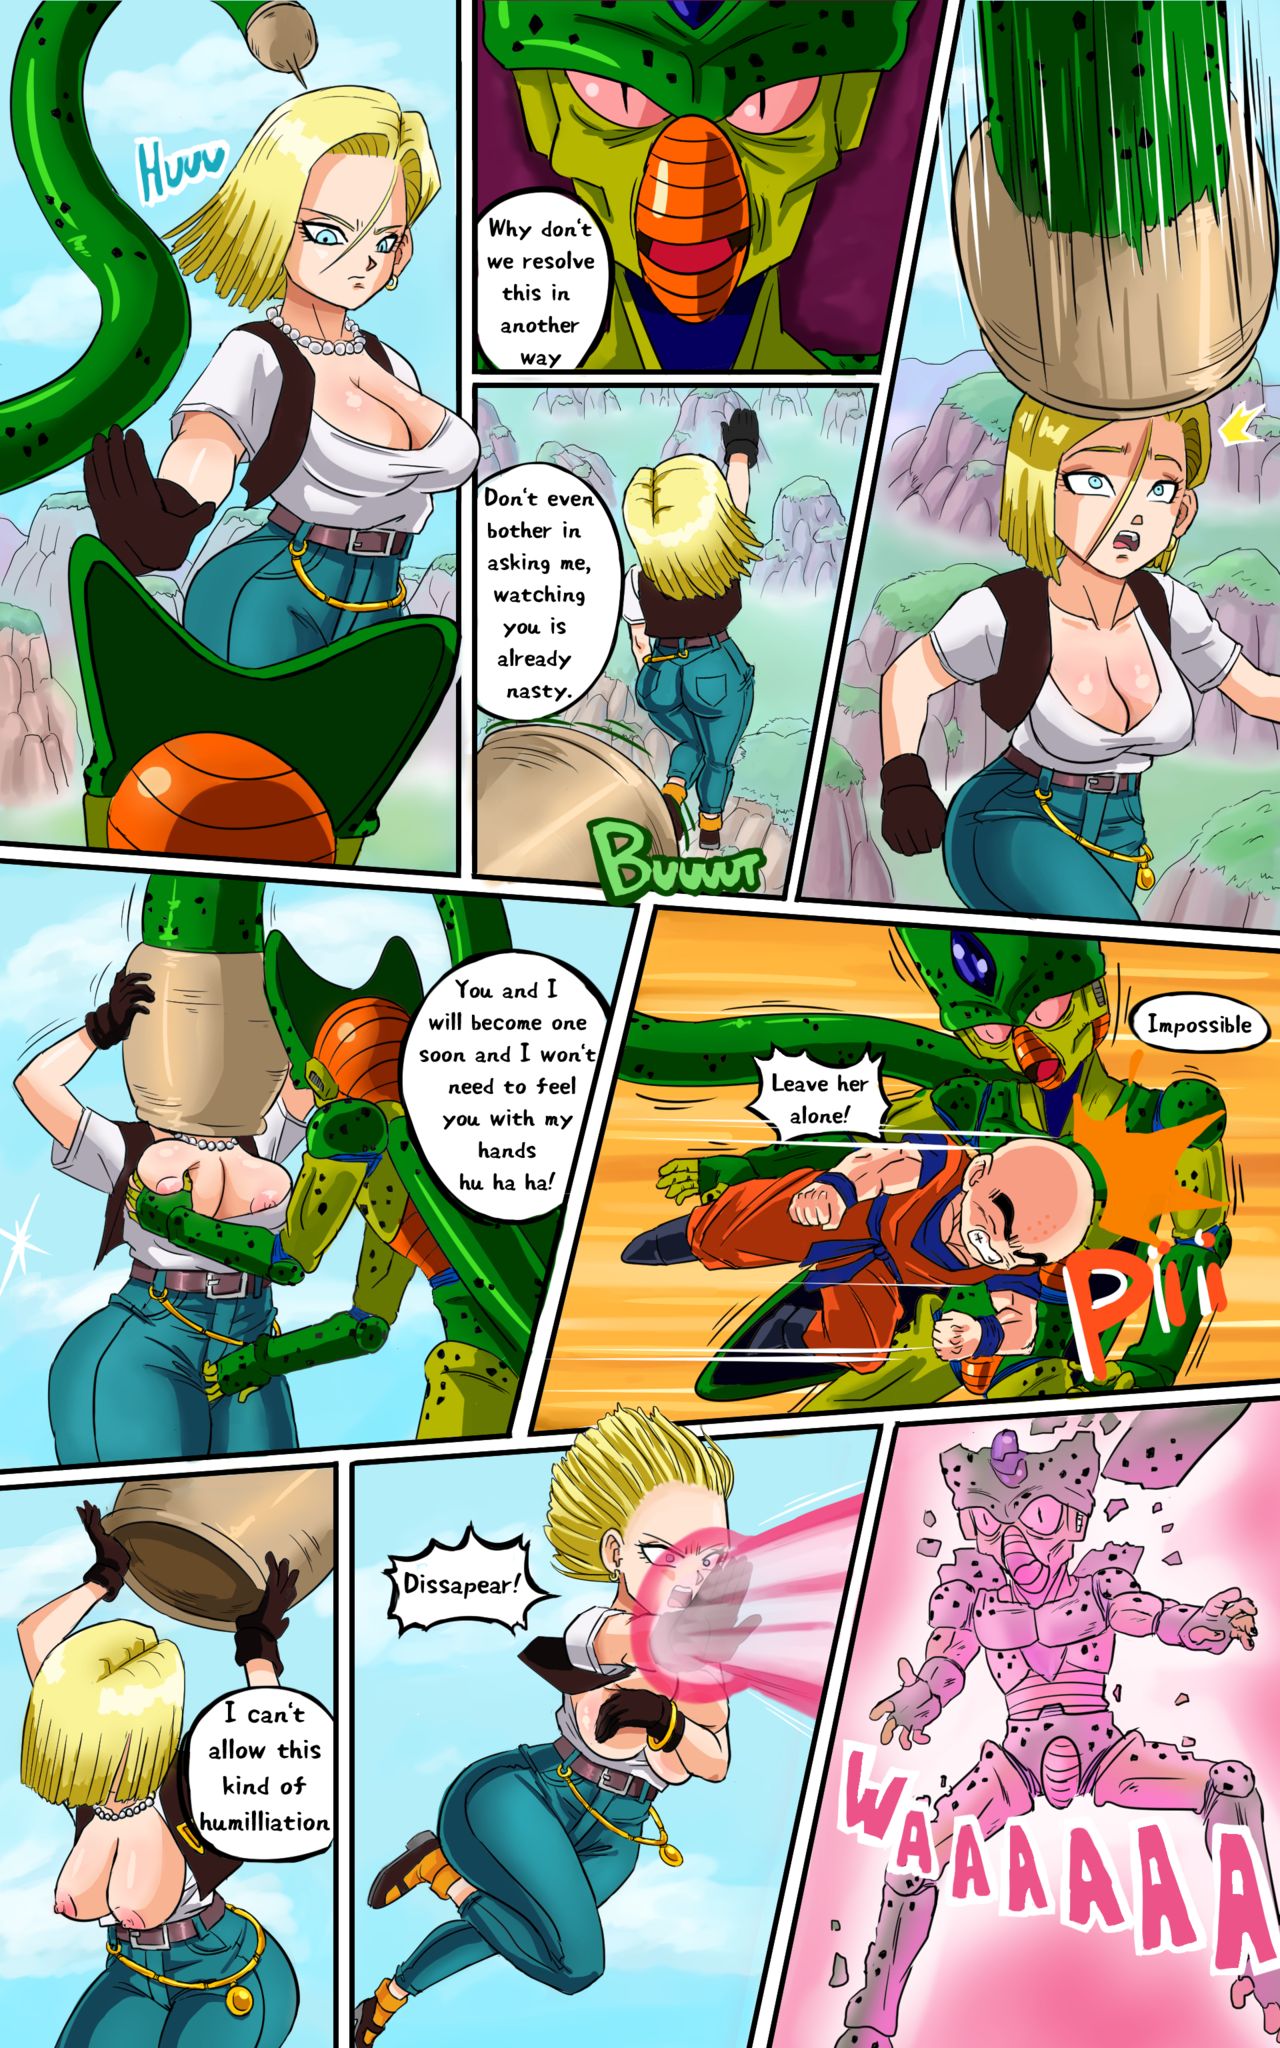 Android 18 meets Krillin Pink Pawg 07